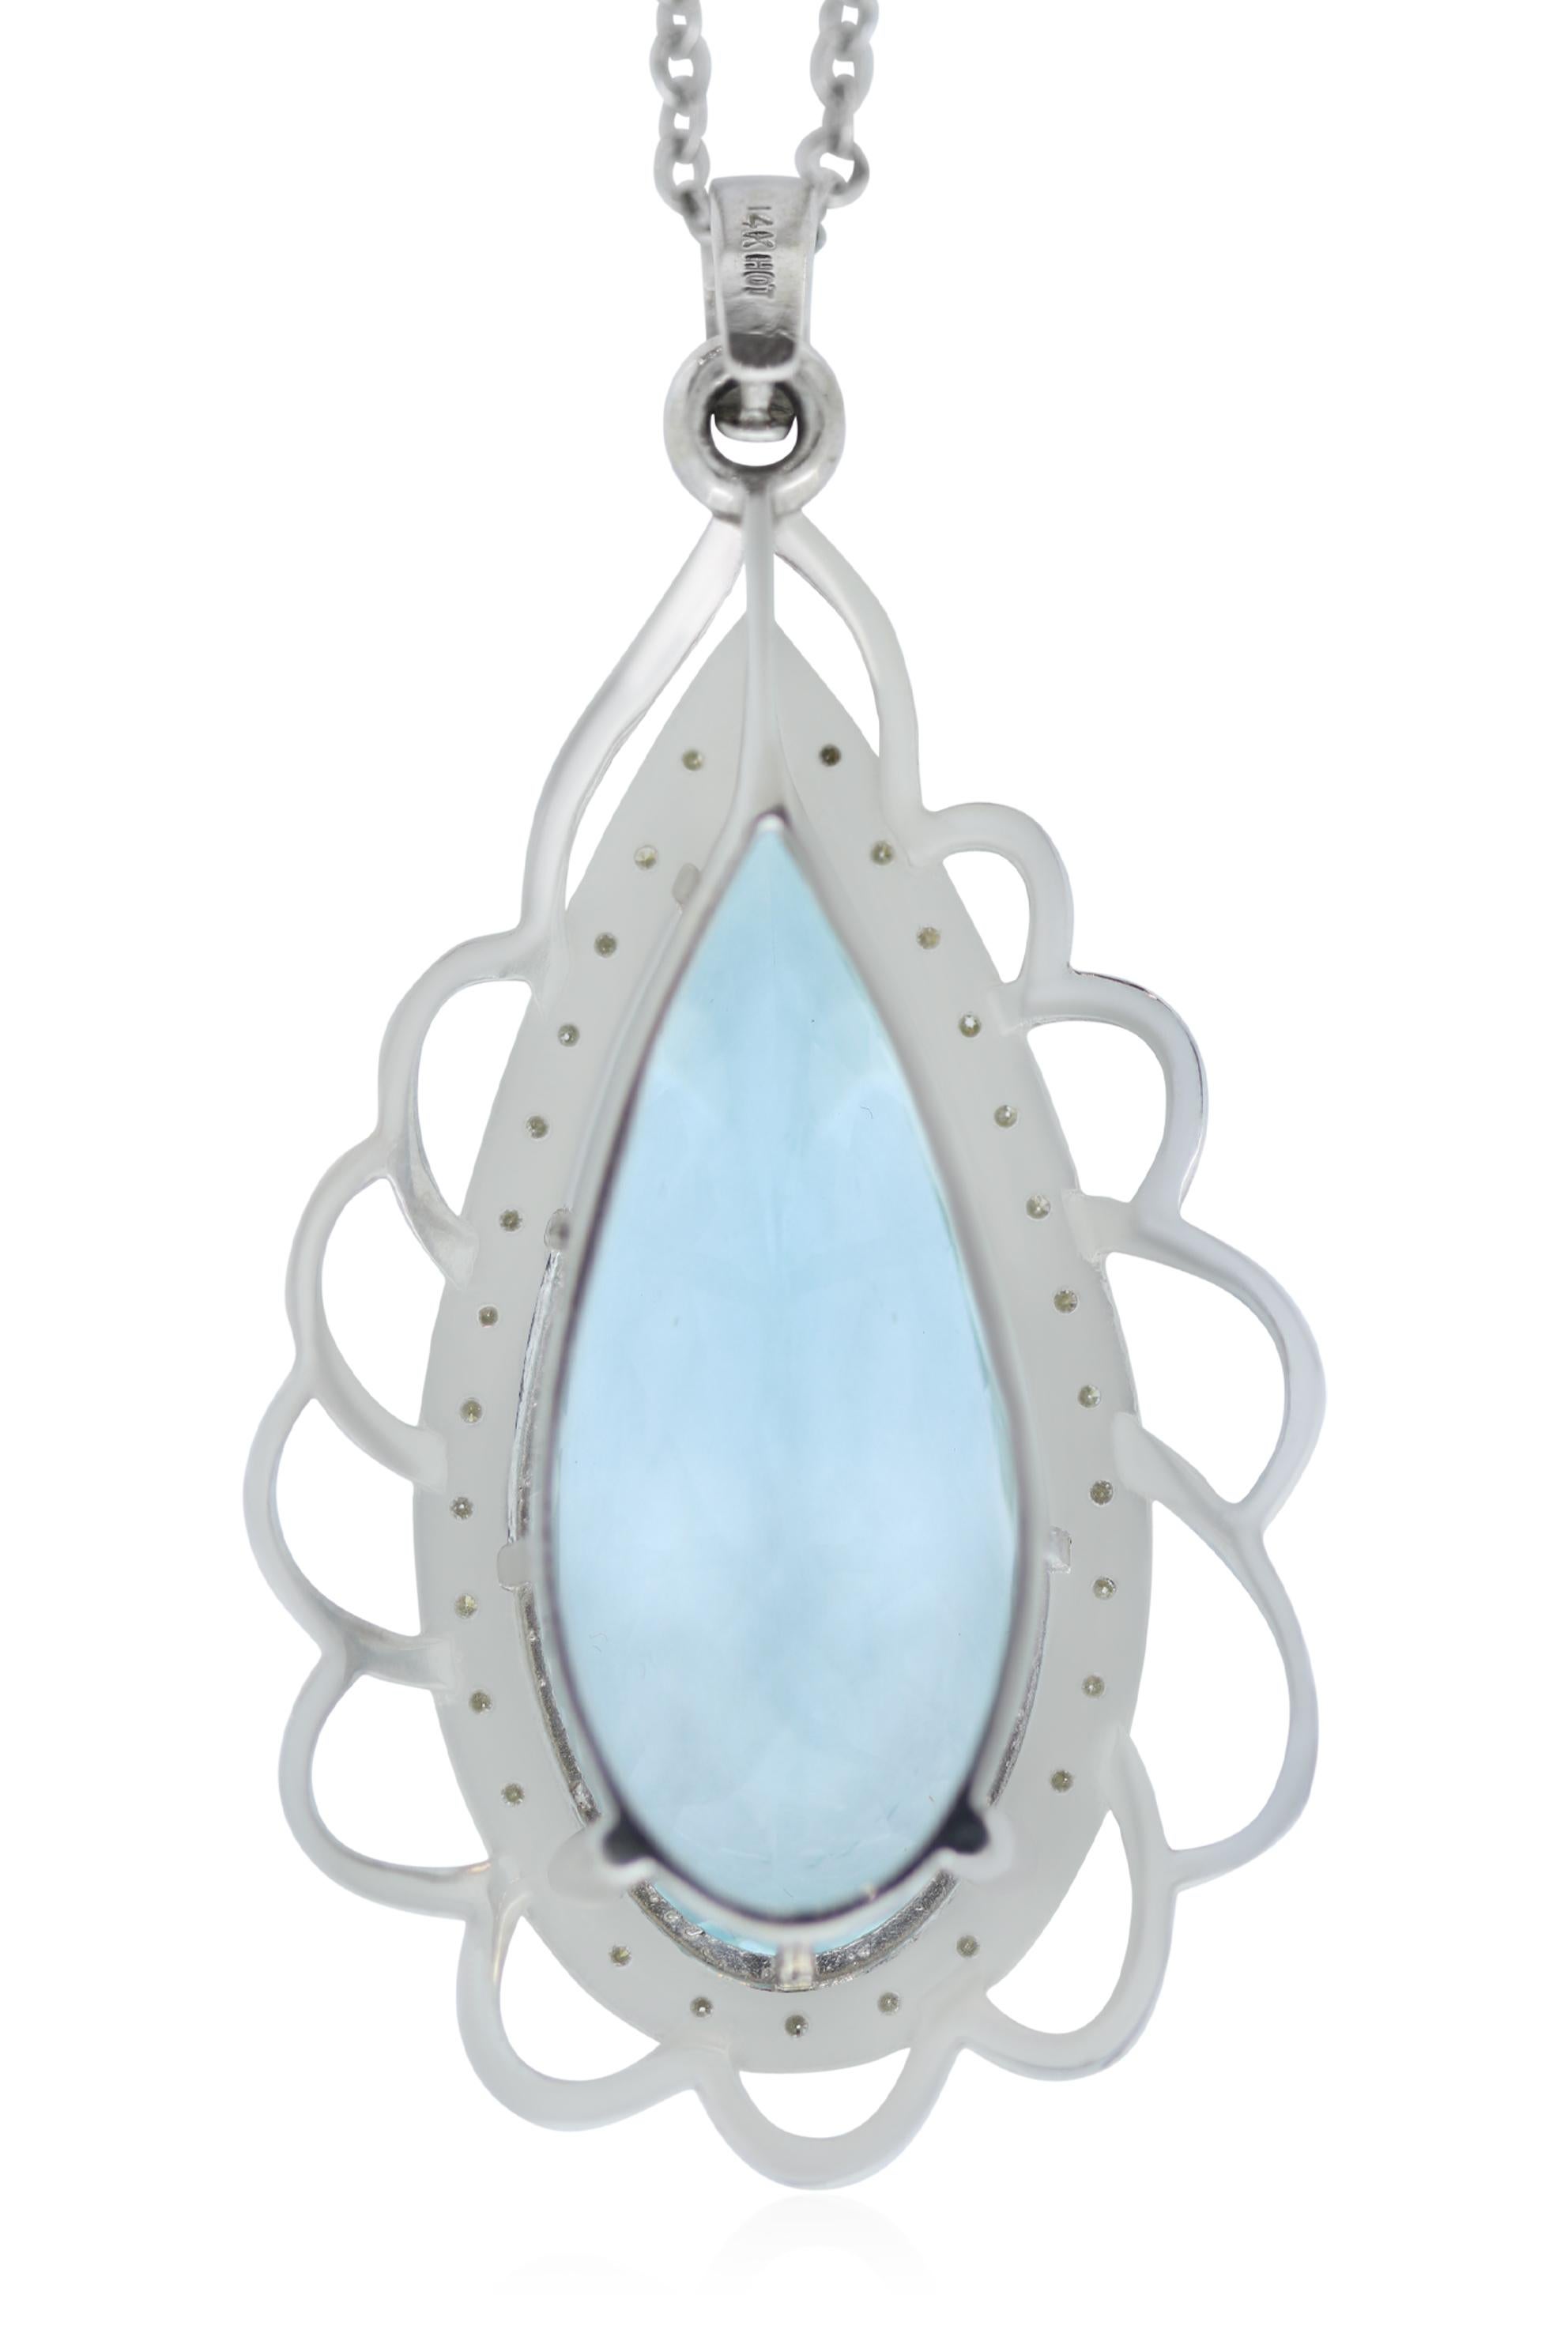 A fun & vibrant piece, this 45.63 Carat Pear shaped Aquamarine will command attention. Framed with 30 brilliant Round White Diamonds at 0.40 Carats, this statement pendant will have all eyes on you. 

Material: 14k White Gold 
Center Stone Details: